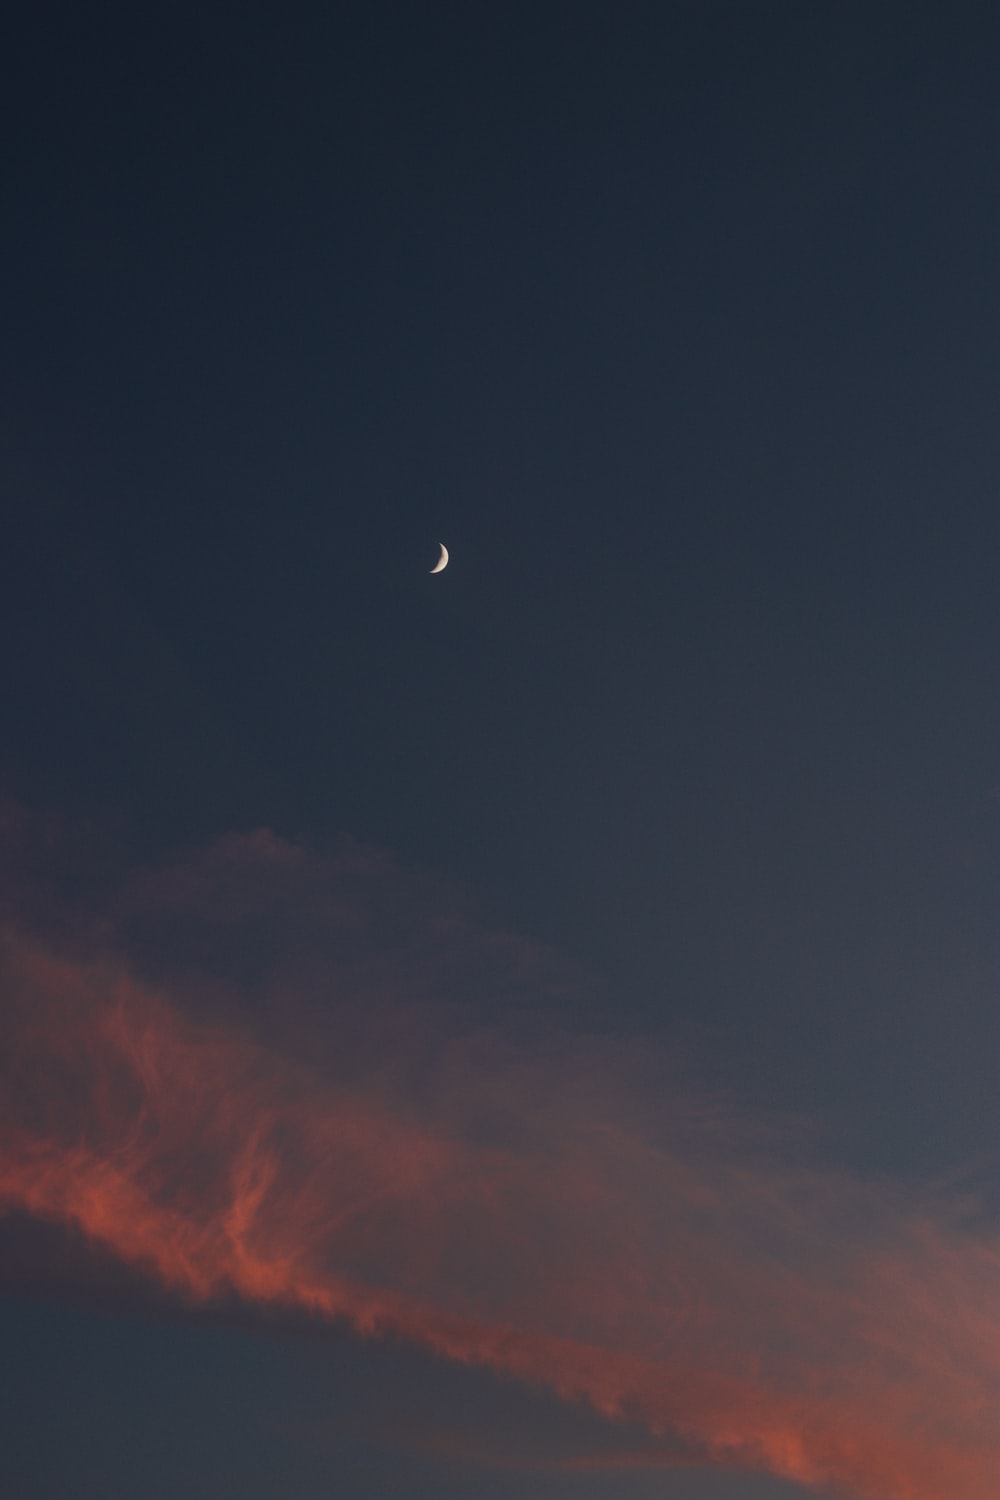 Moon Aesthetic Picture. Download Free Image